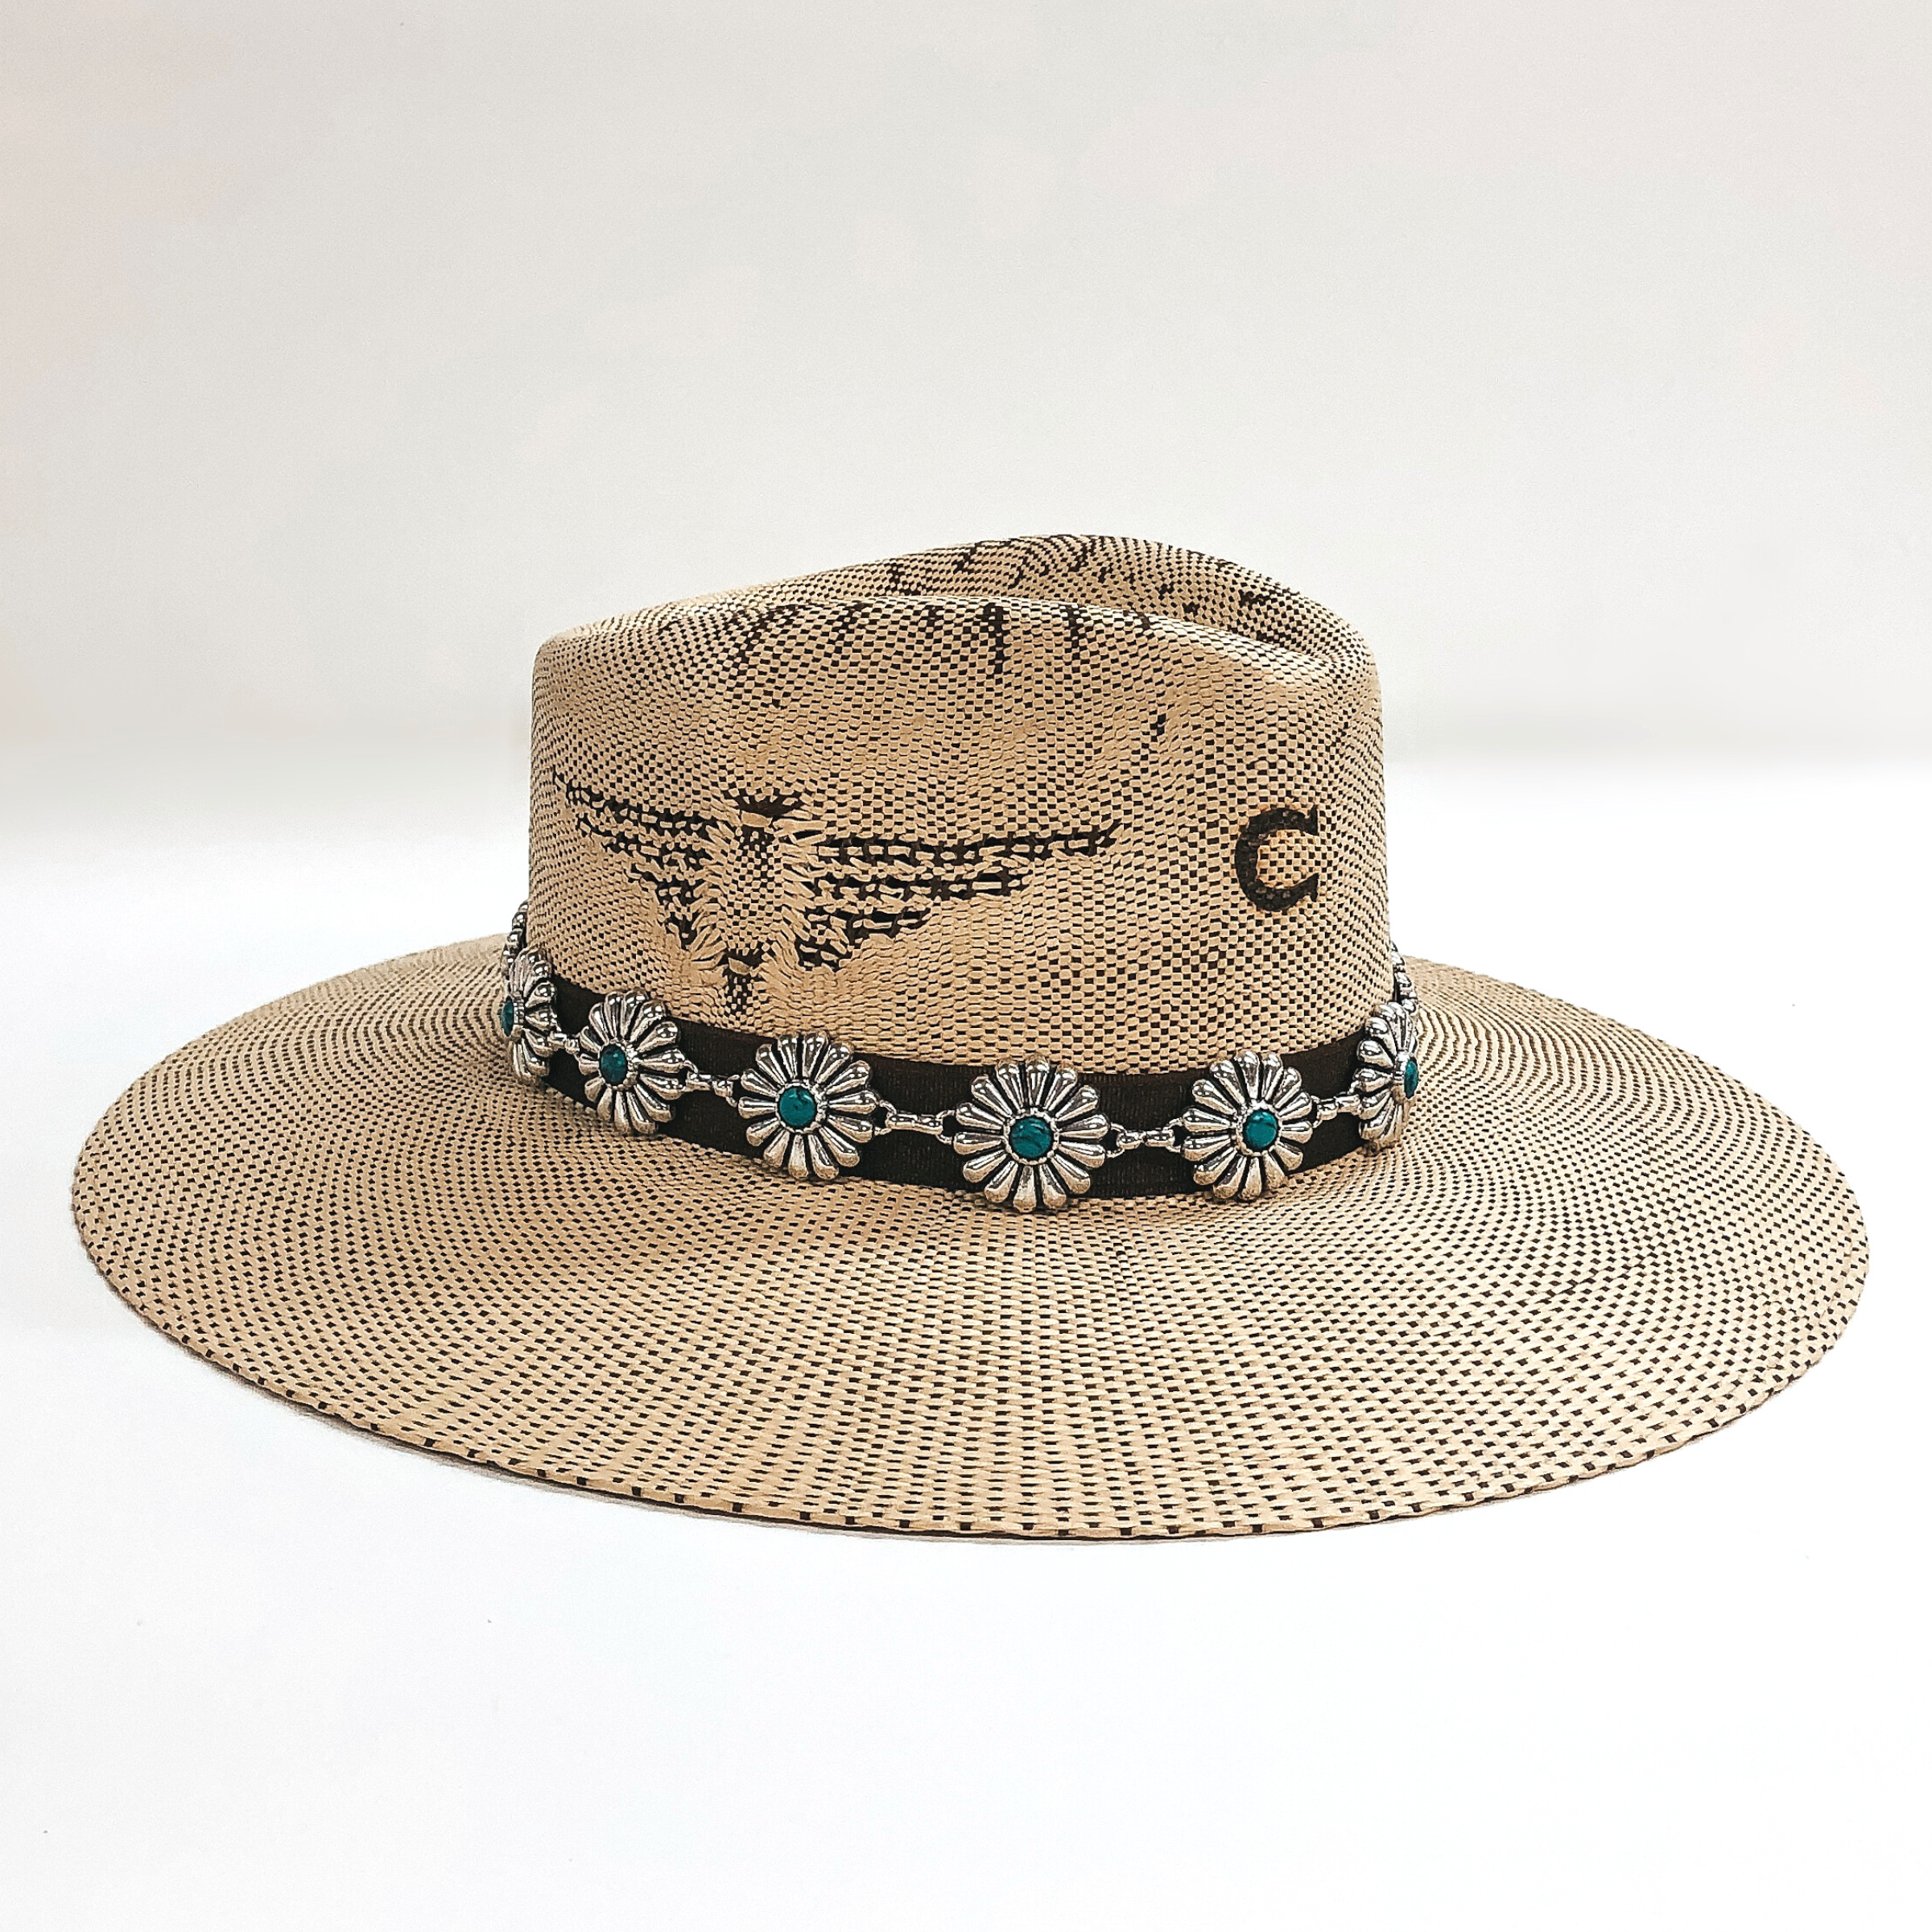 Silver Tone Circle Concho Hat Band with Faux Turquoise Stones - Giddy Up Glamour Boutique